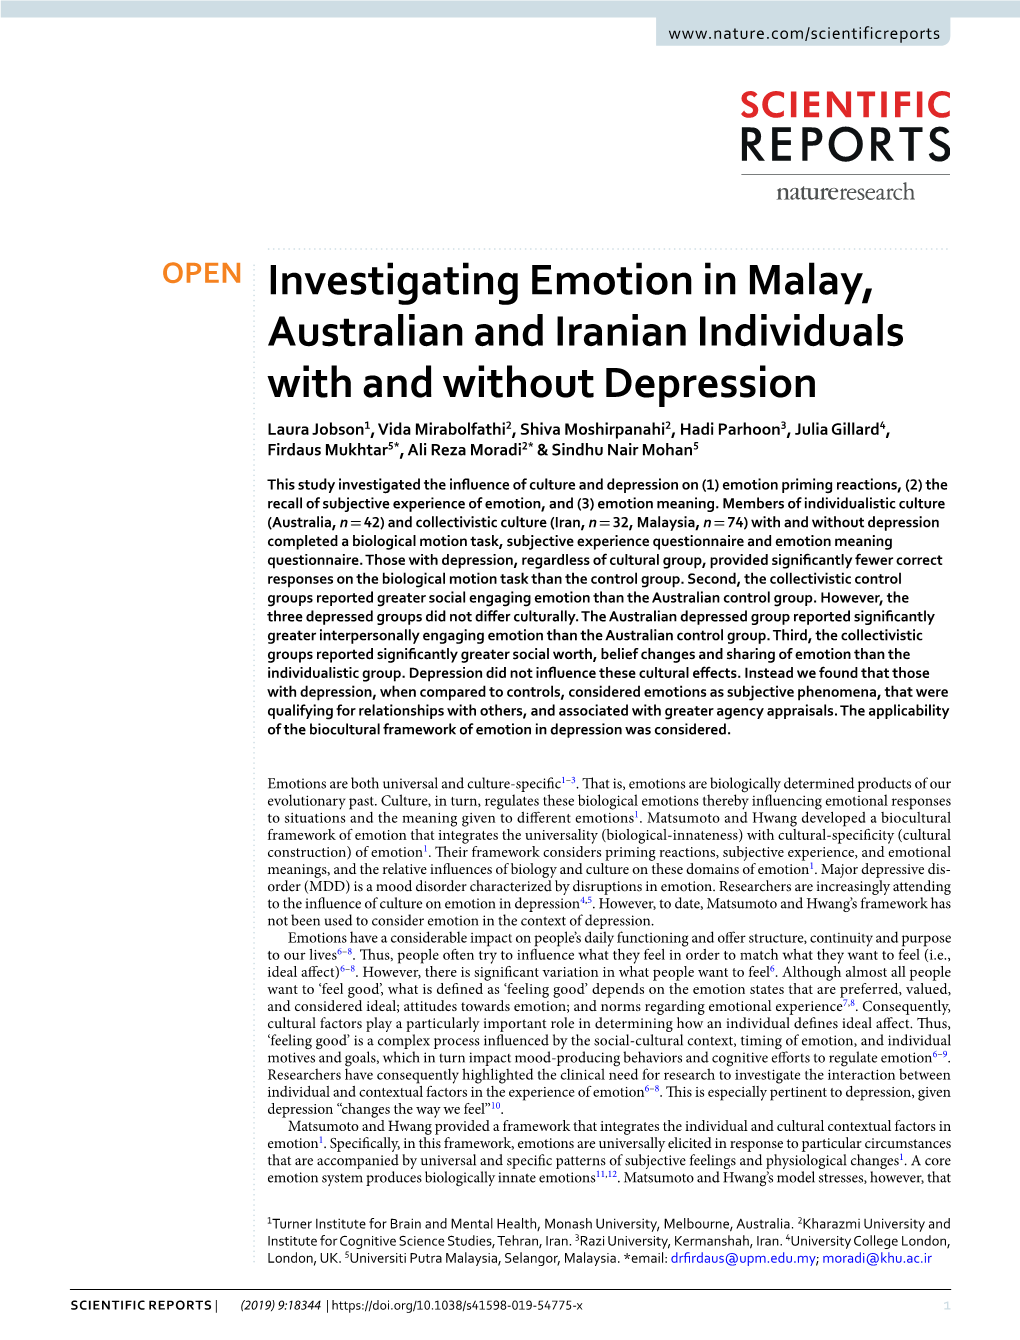 Investigating Emotion in Malay, Australian and Iranian Individuals